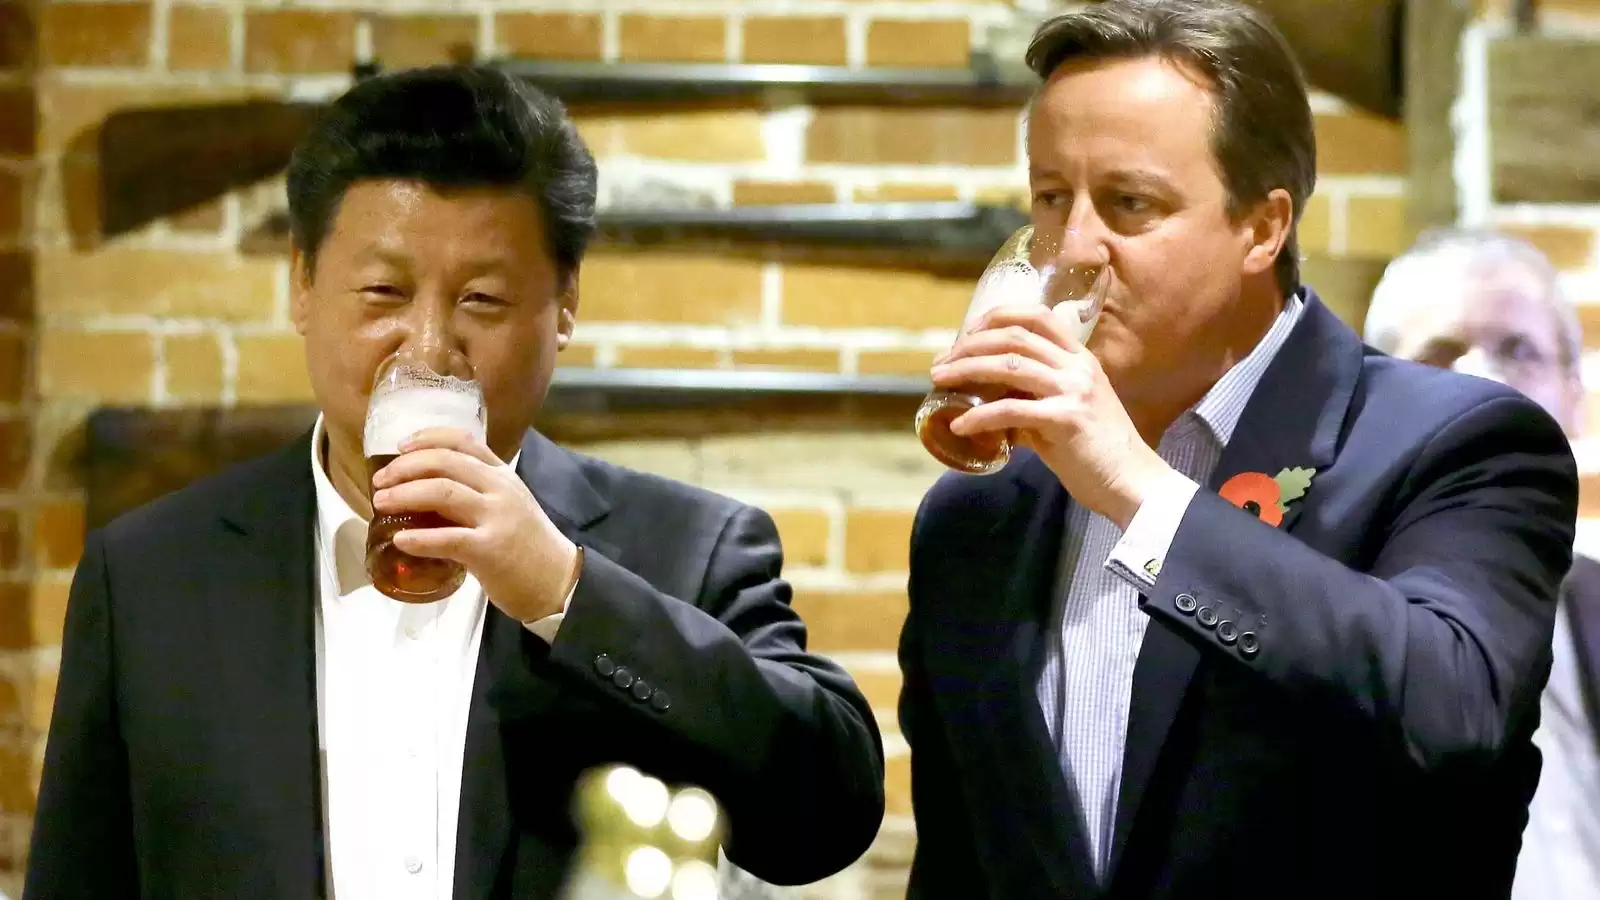 Failed Remain campaign, pints with Chinese premier: David Cameron's global track record